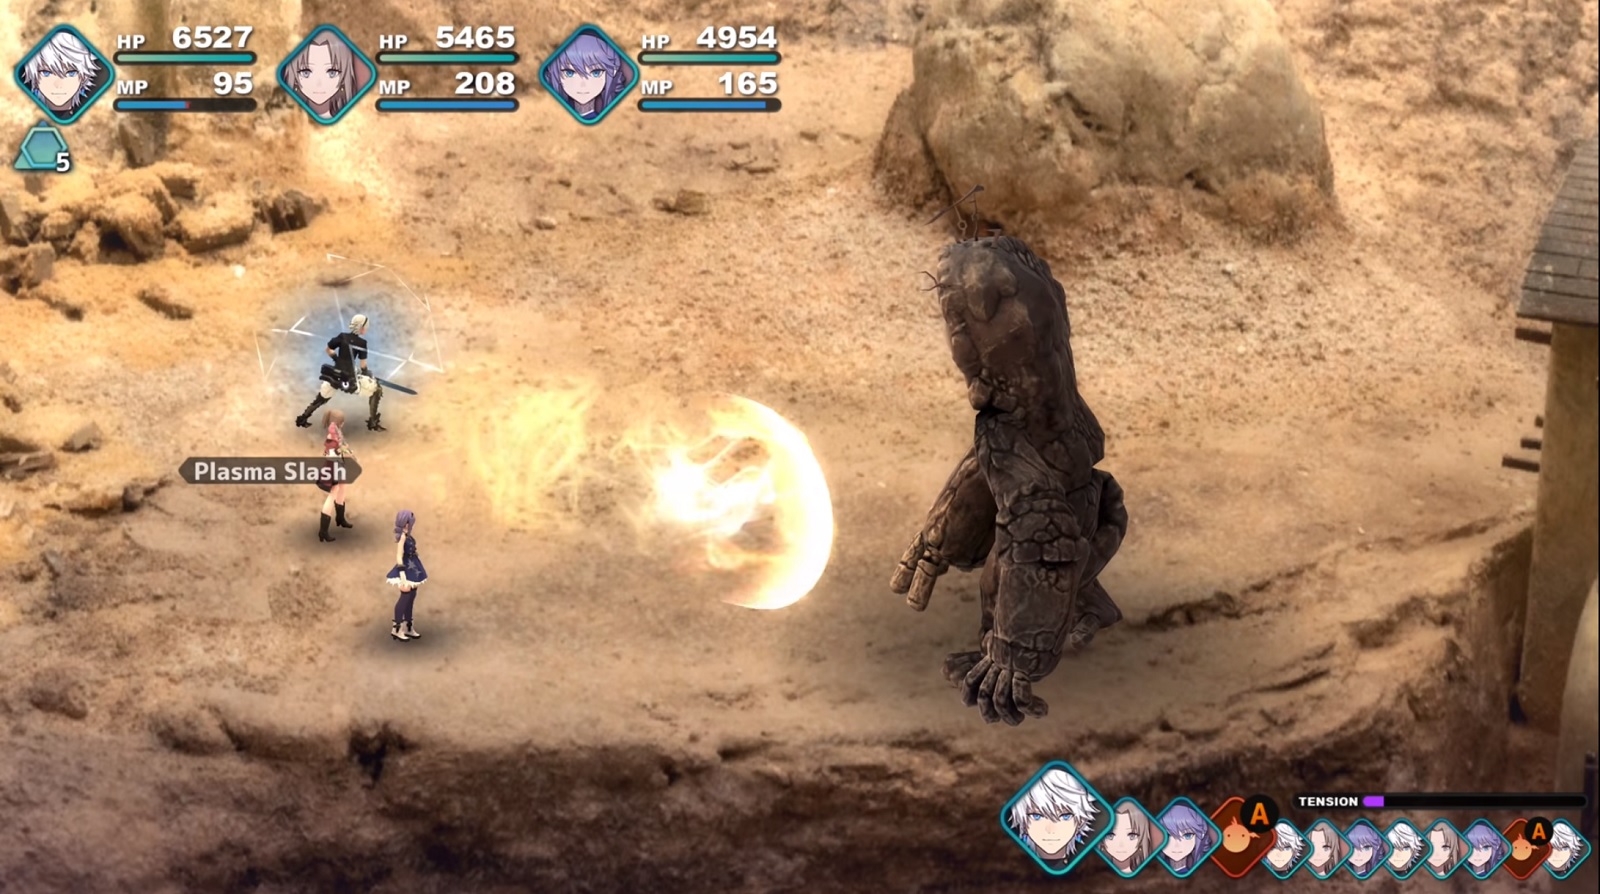 Final Fantasy XVI comes to PS5: Watch the trailer - CNET